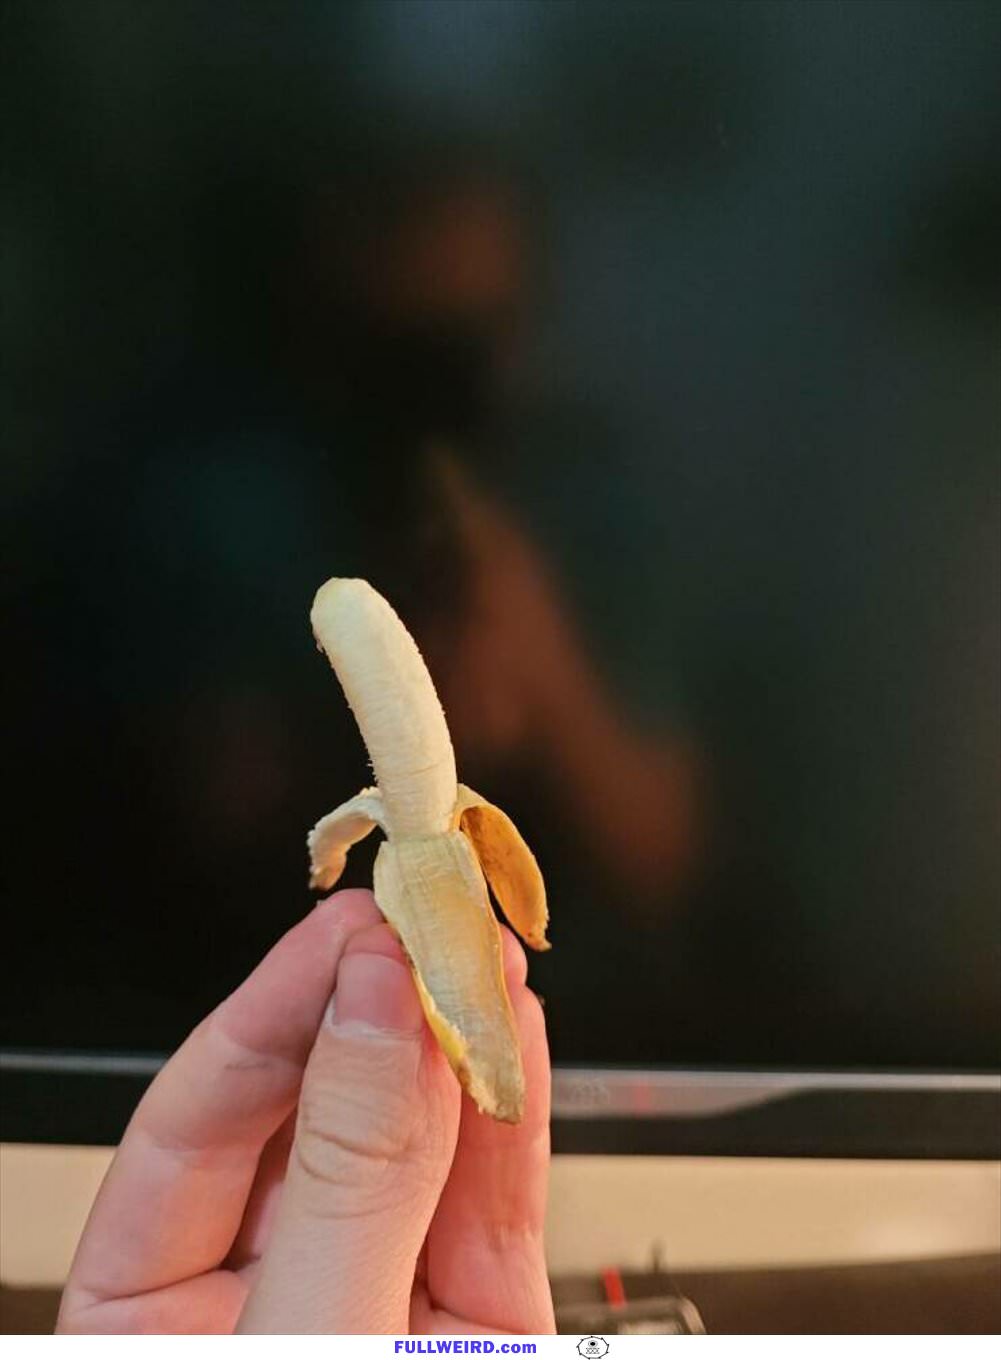 That Is A Tiny Banana